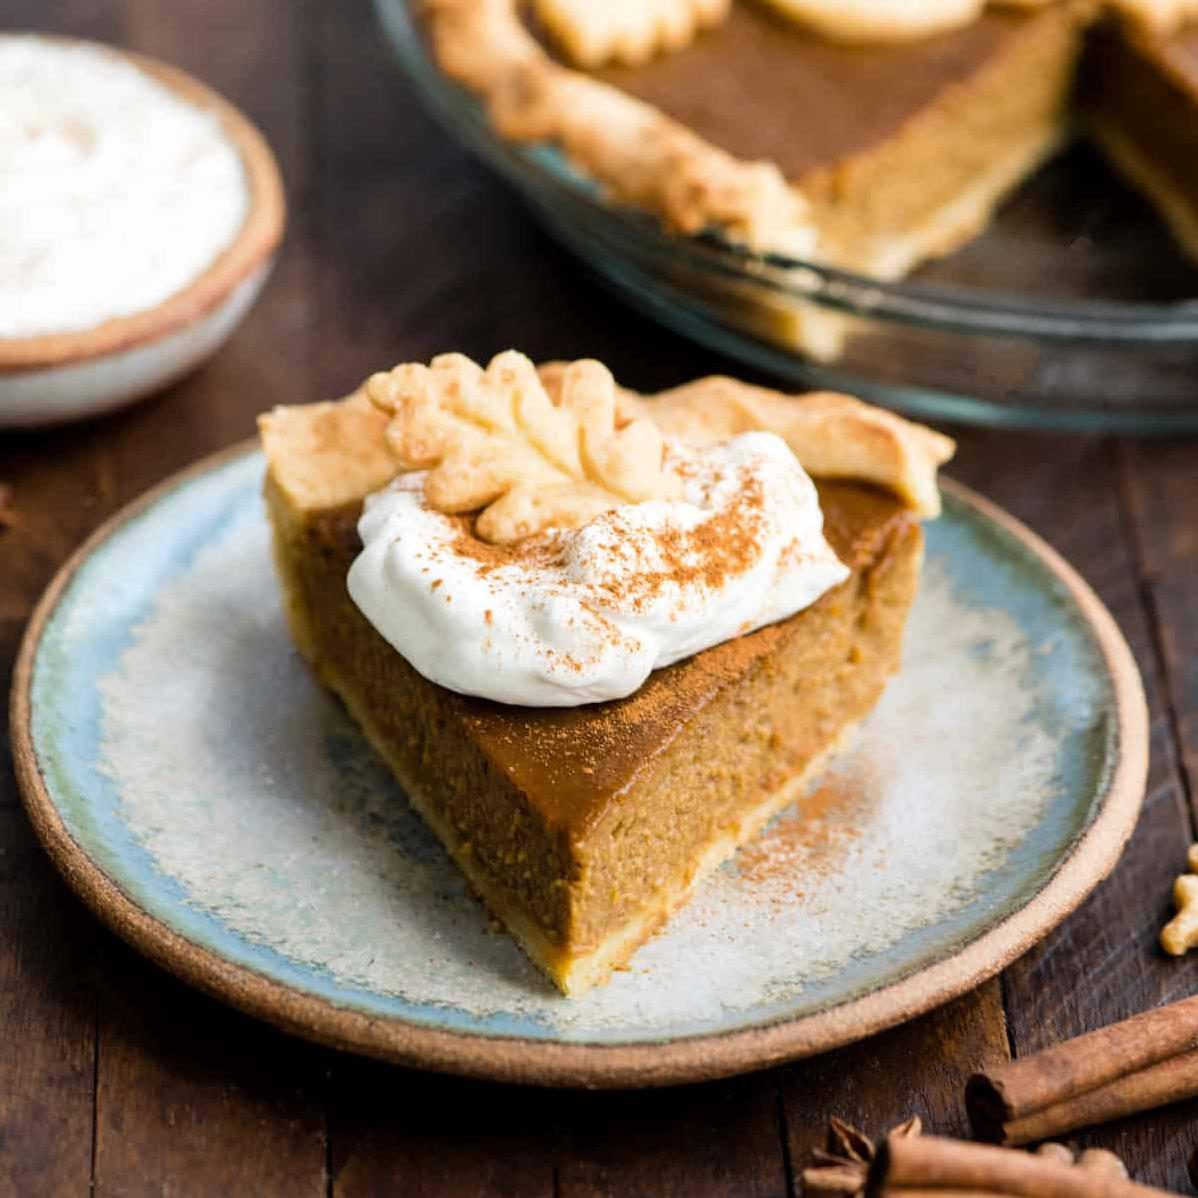  Fall in love with this soy-free, vegan and dairy-free pumpkin pie!